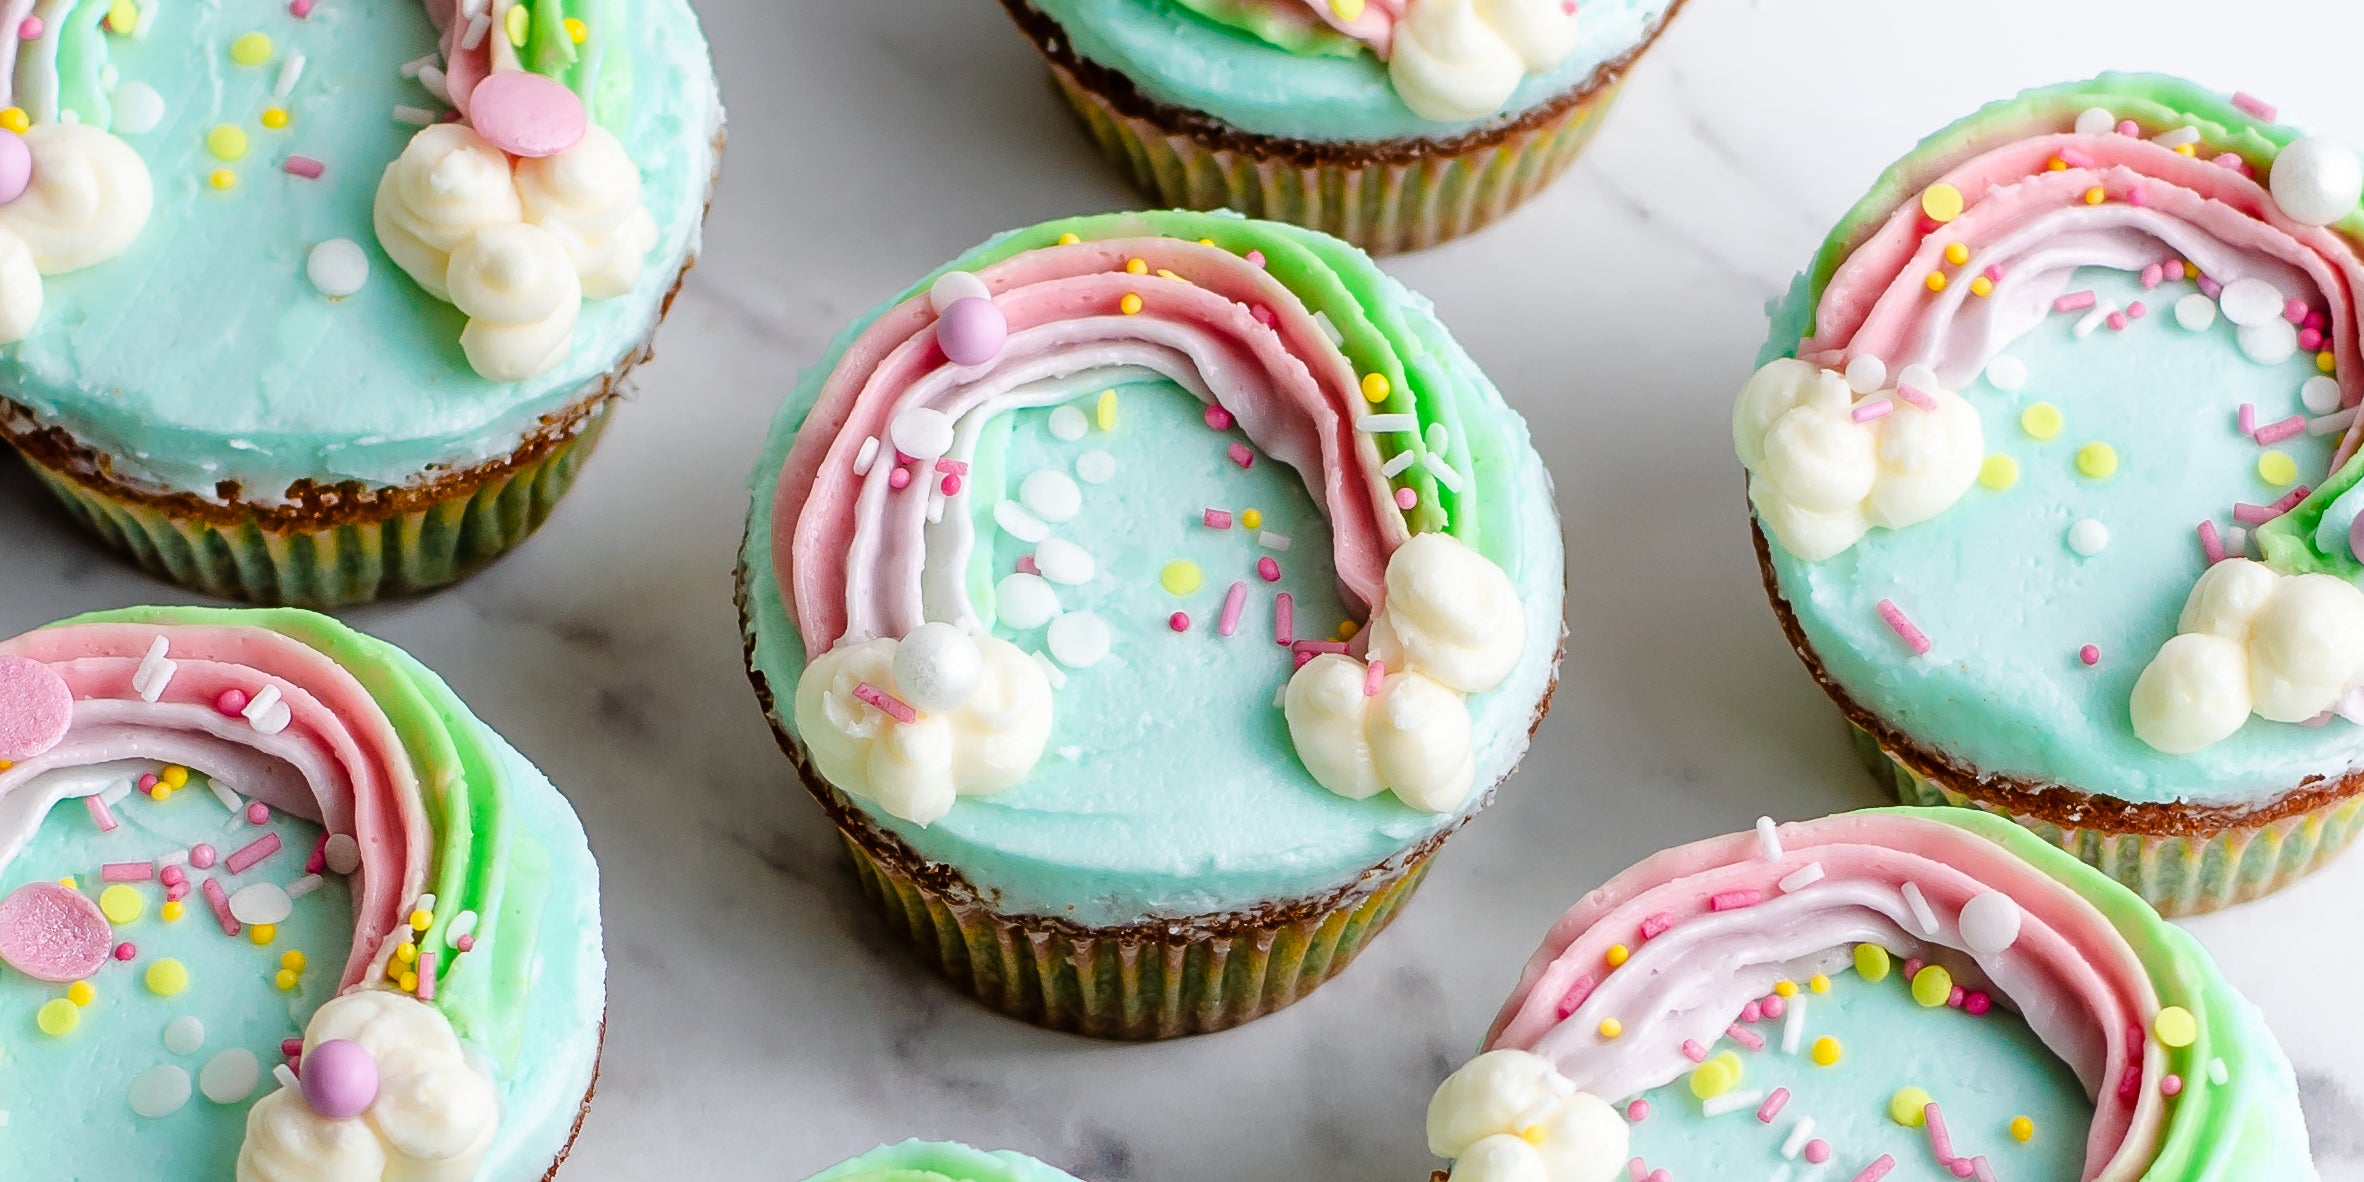 Close up on several cupcakes decorated with blue buttercream and a rainbow decoration